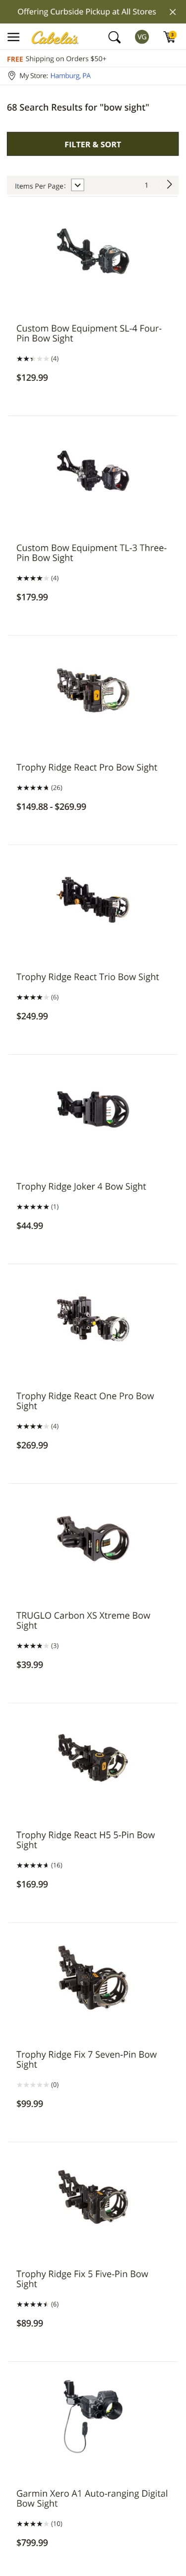 cabelas search result page mobile